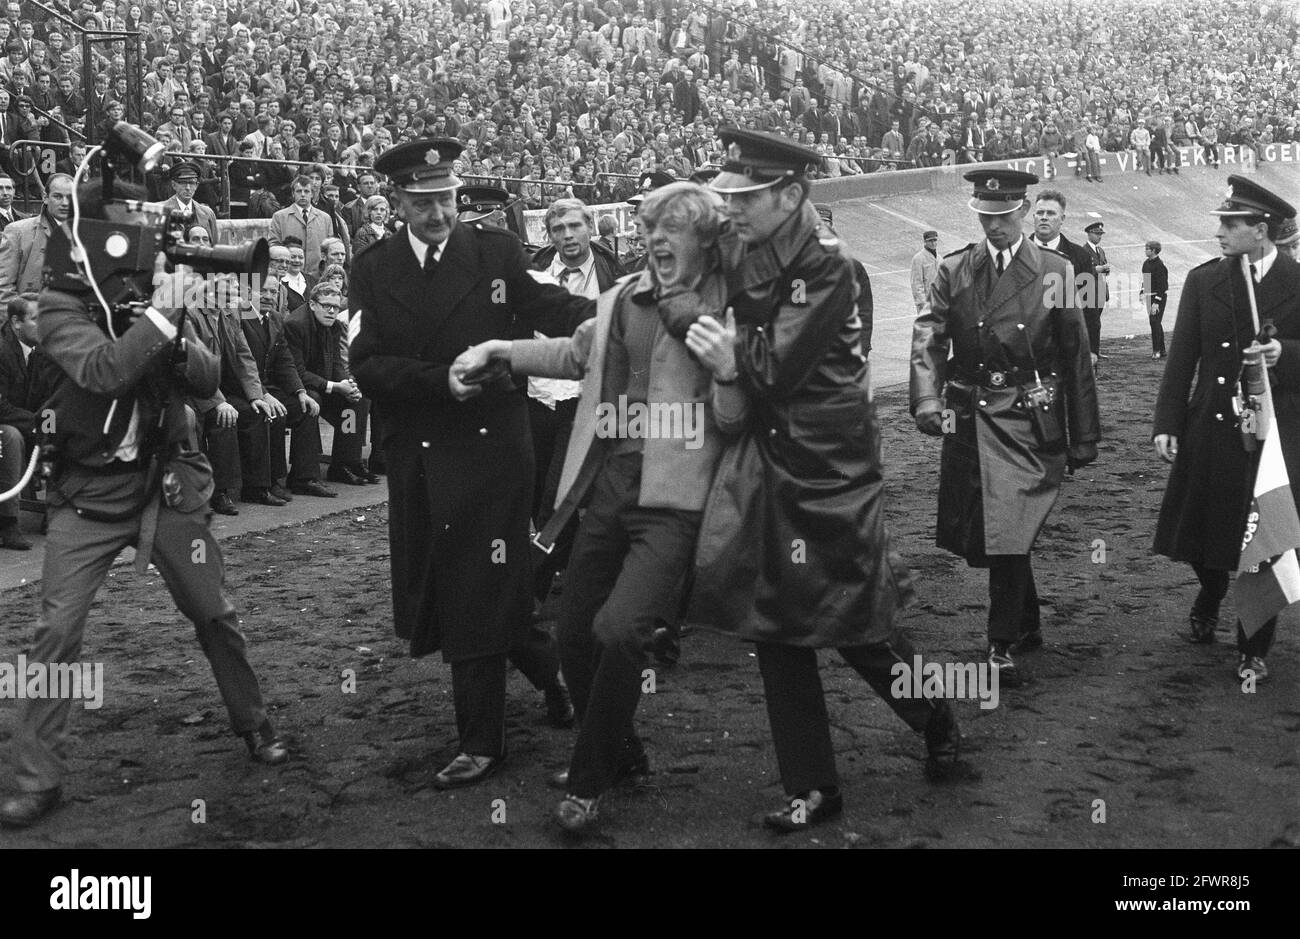 NEC v Feyenoord 0-2. Police officers remove supporter, October 26, 1969, POLICE AGENTS, sports, supporters, soccer, The Netherlands, 20th century press agency photo, news to remember, documentary, historic photography 1945-1990, visual stories, human history of the Twentieth Century, capturing moments in time Stock Photo